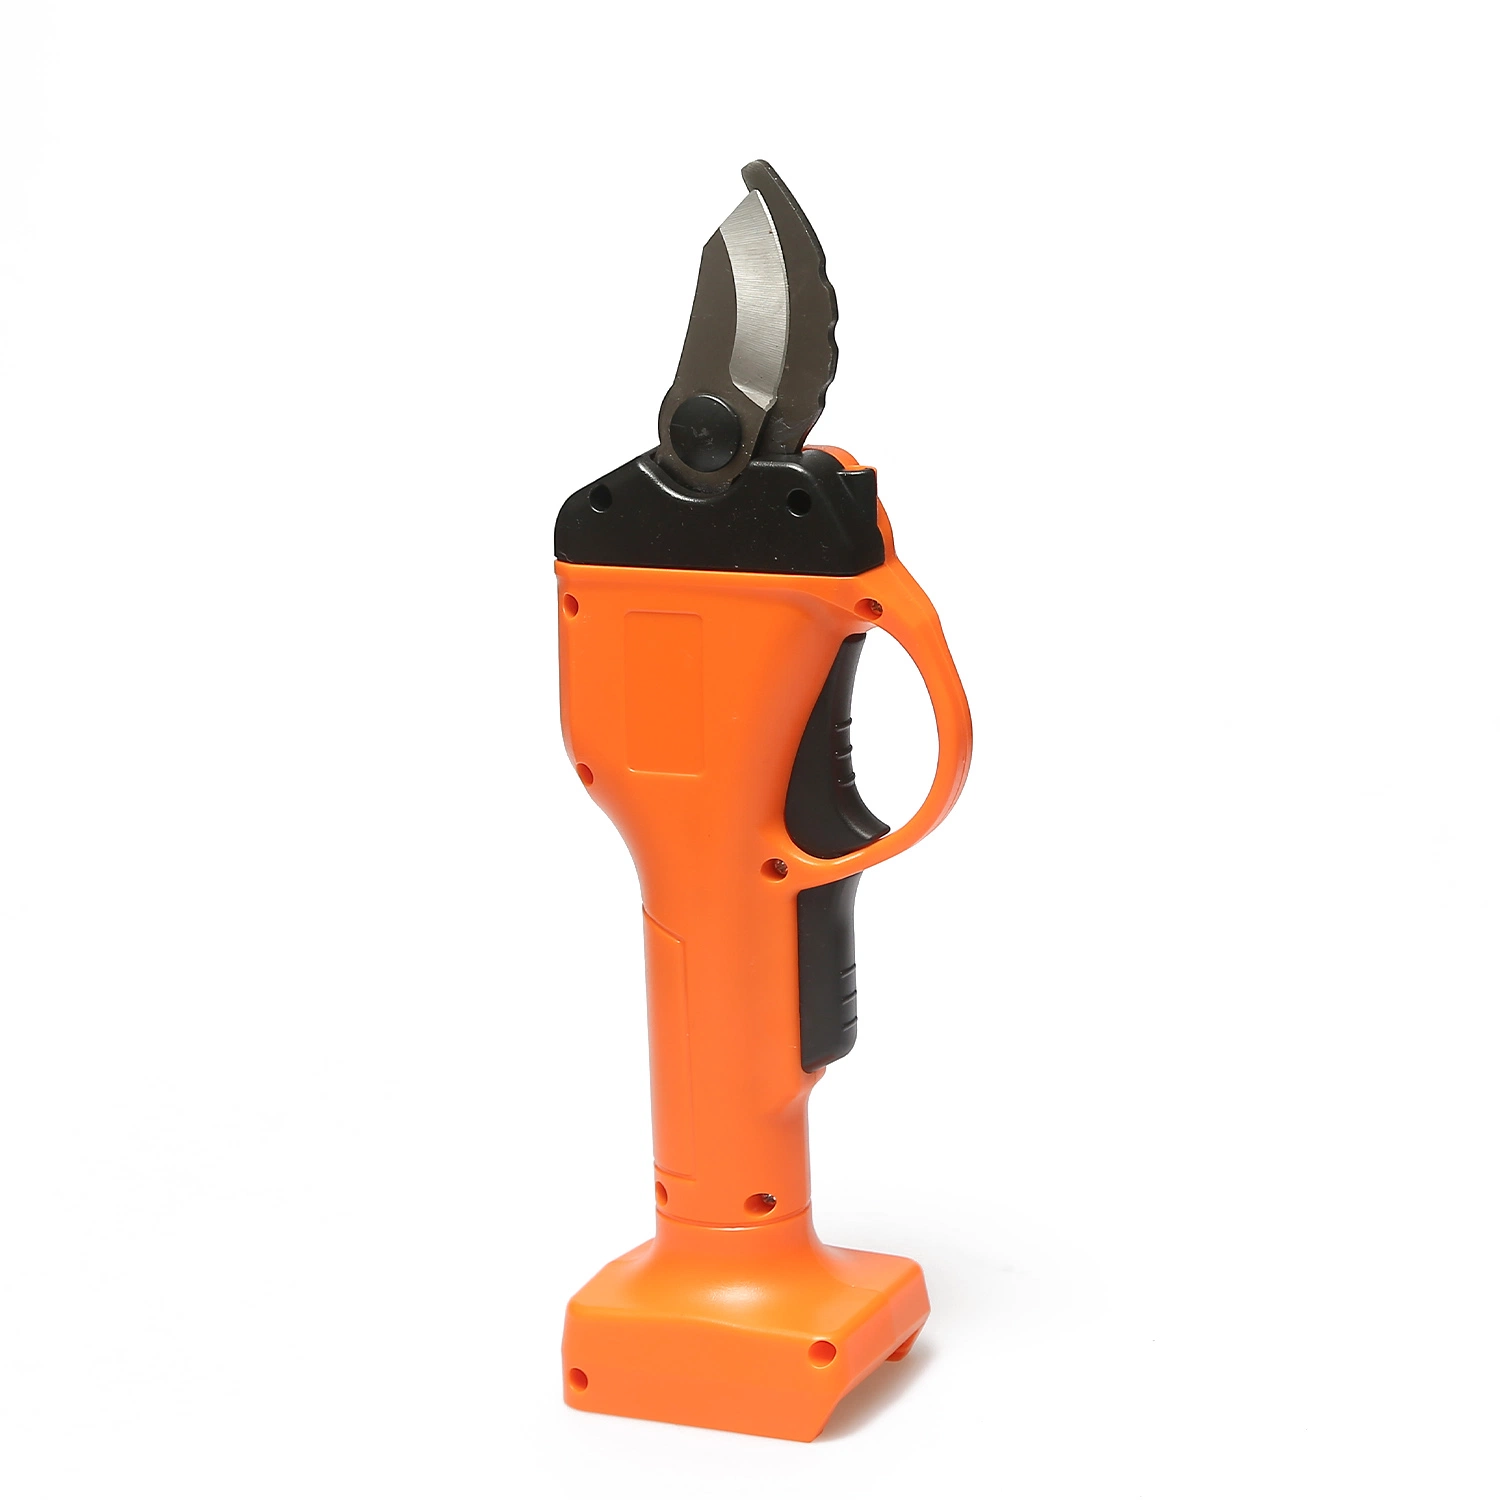 Electric Pruning Shear Garden Power Tool Cordless Rechargeable Battery